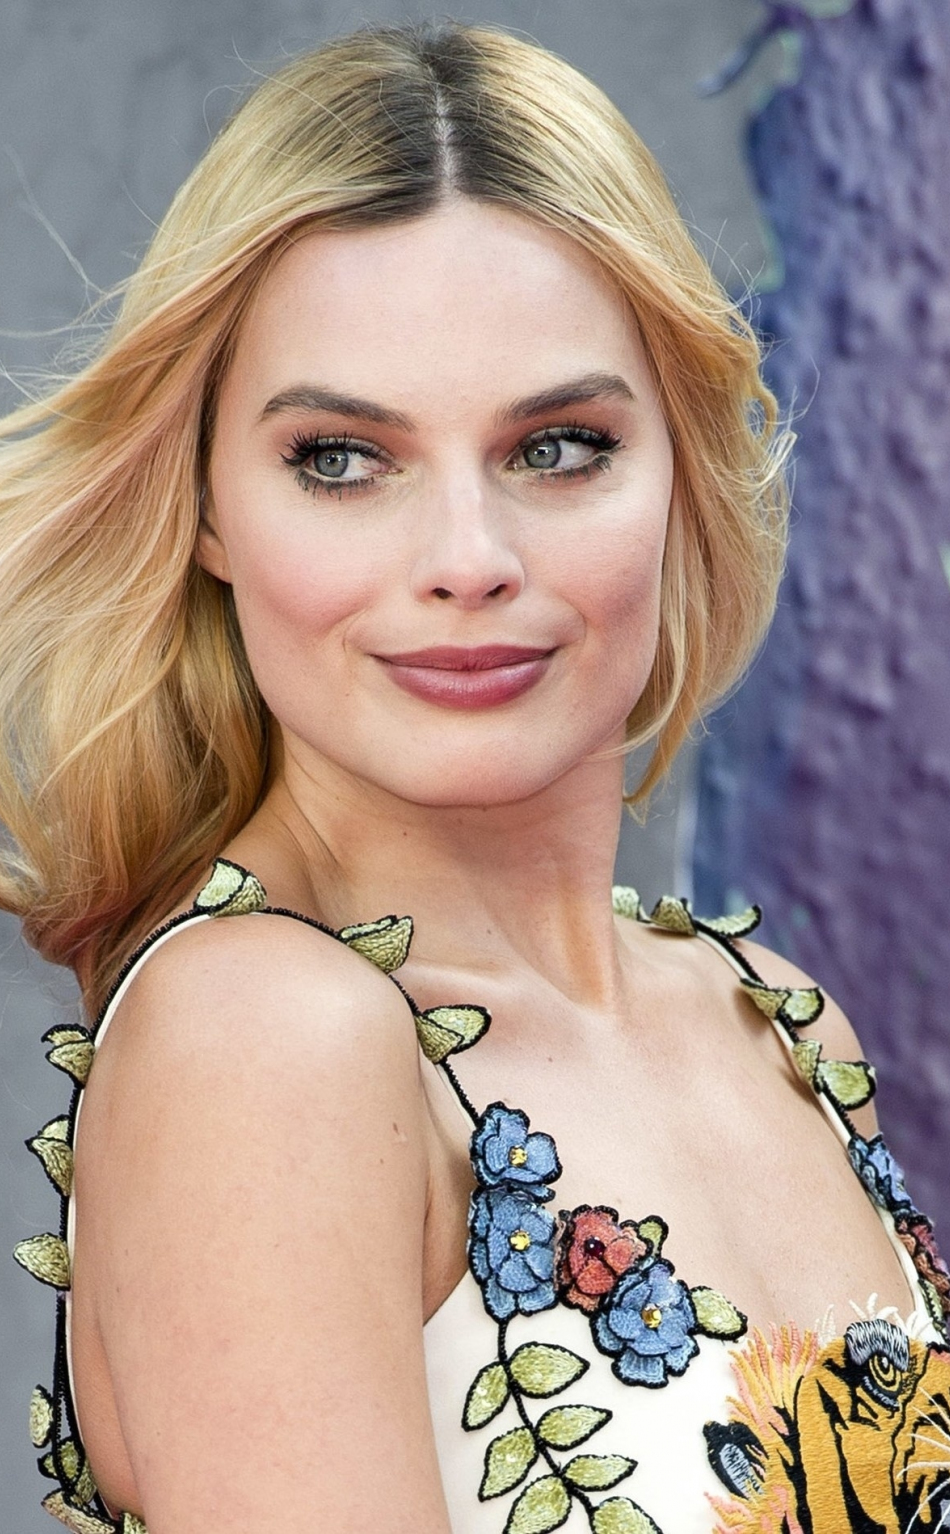 Download 950x1534 Wallpaper Blonde And Beautiful 2019 Margot Robbie Iphone 950x1534 Hd Image